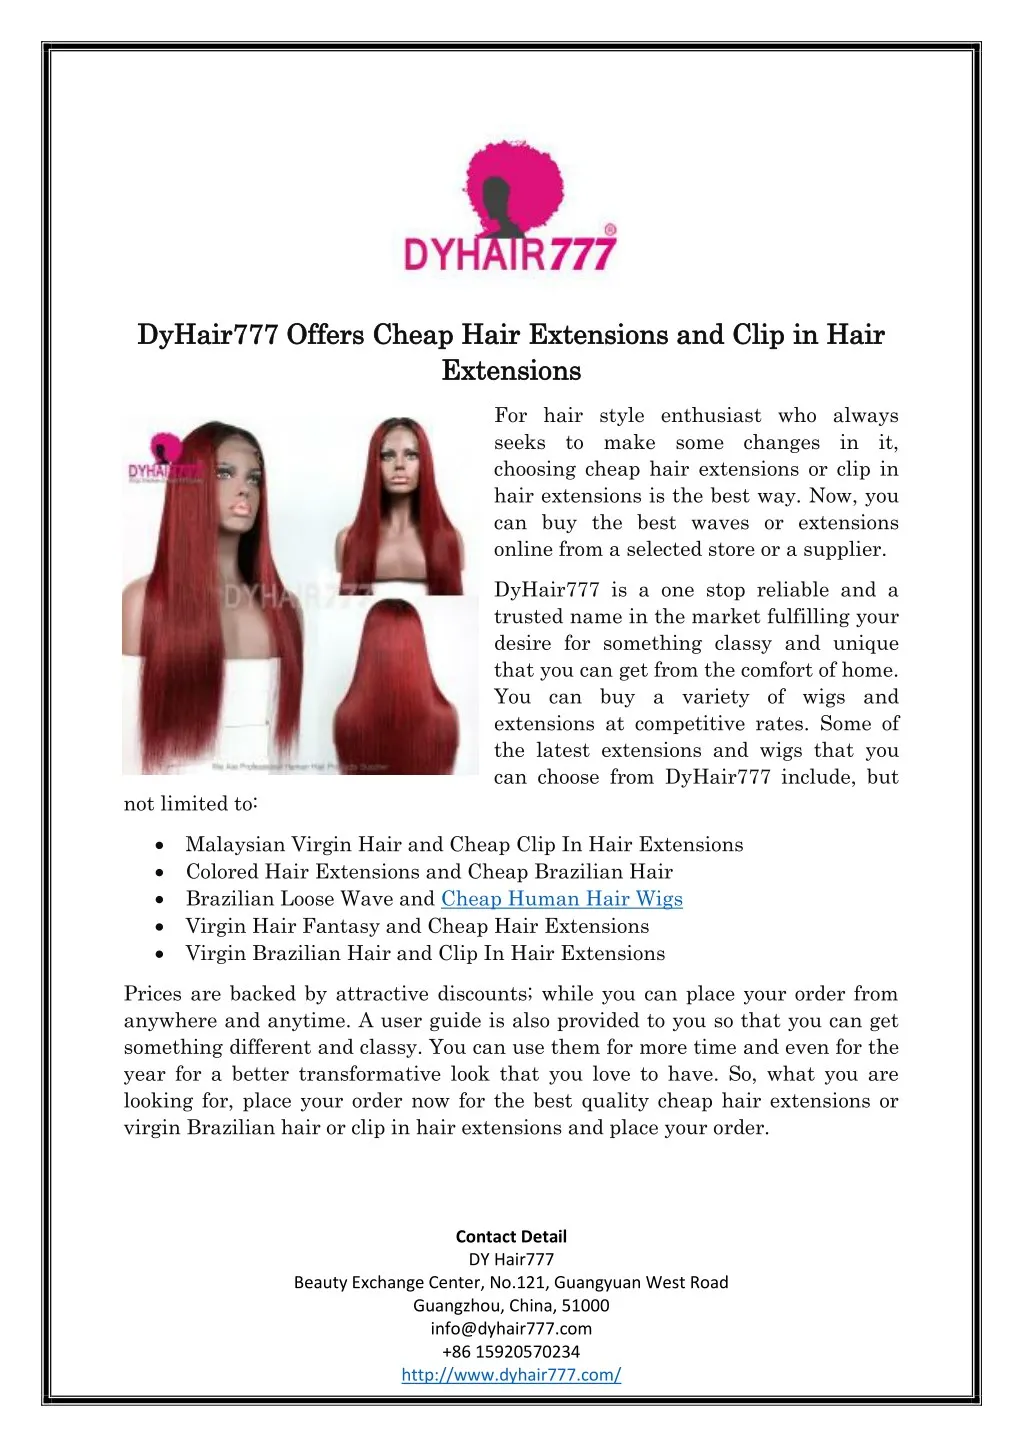 dyhair777 offers cheap hair extensions and clip